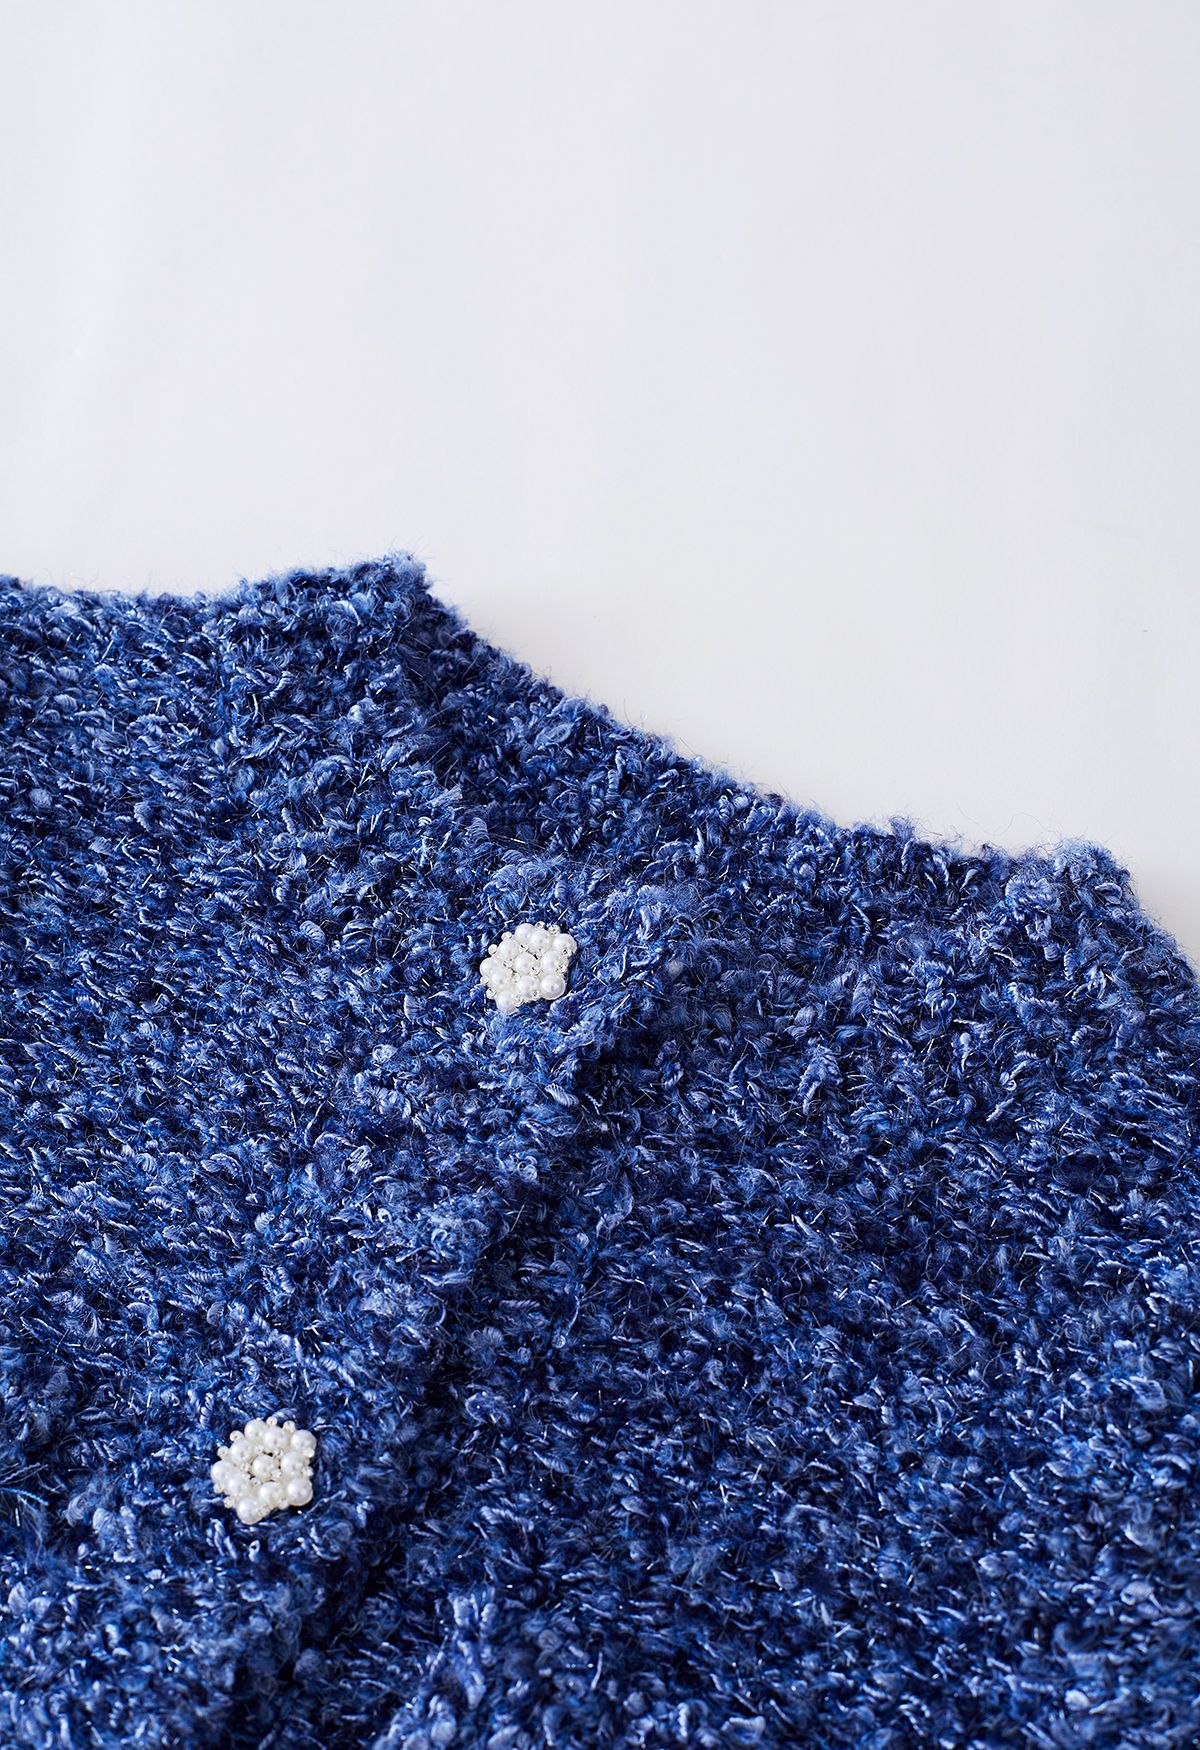 Pearly Button Shimmer Fuzzy Crop Cardigan in Blue